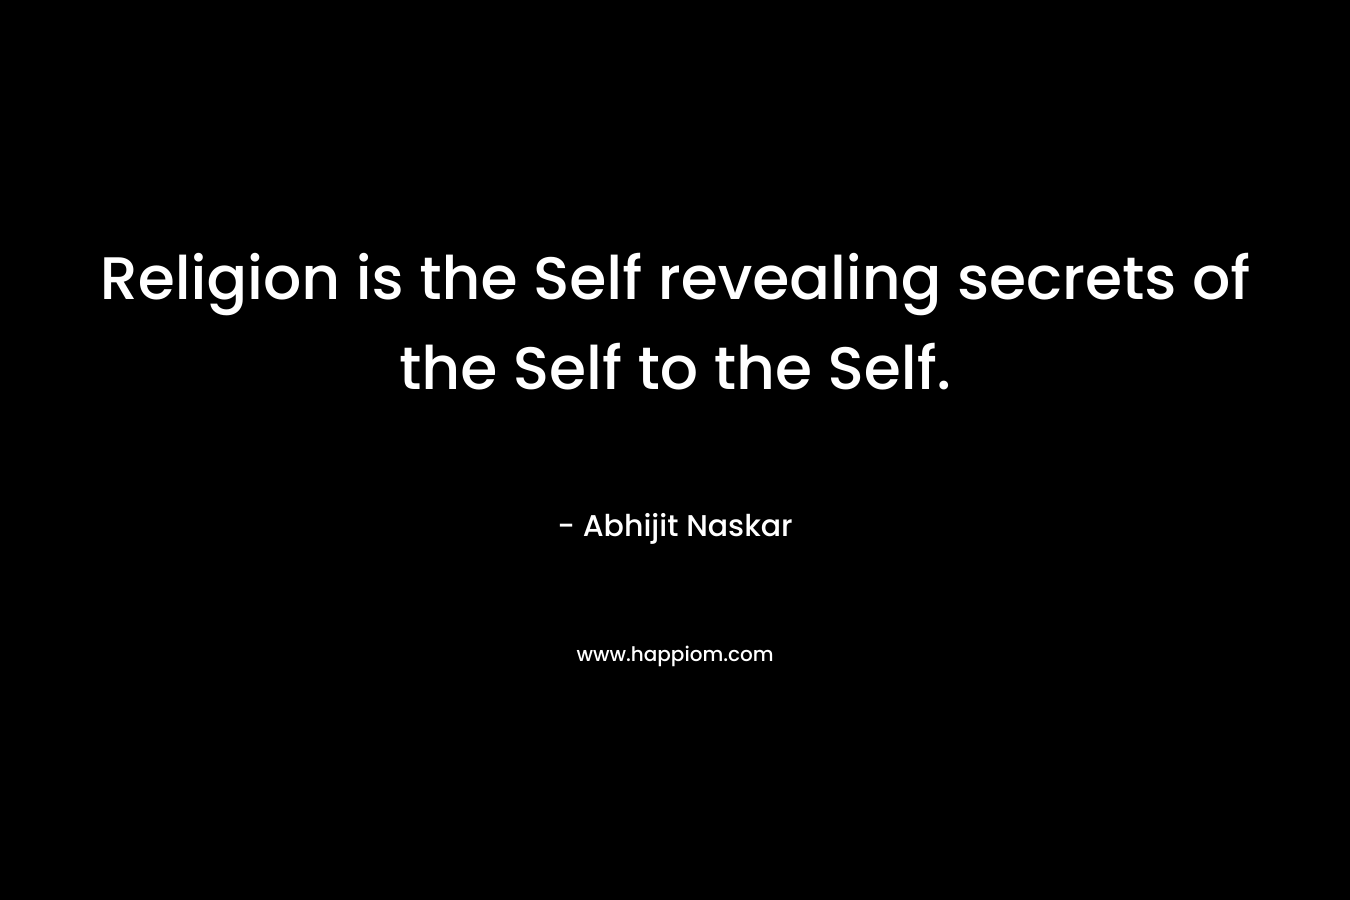 Religion is the Self revealing secrets of the Self to the Self.